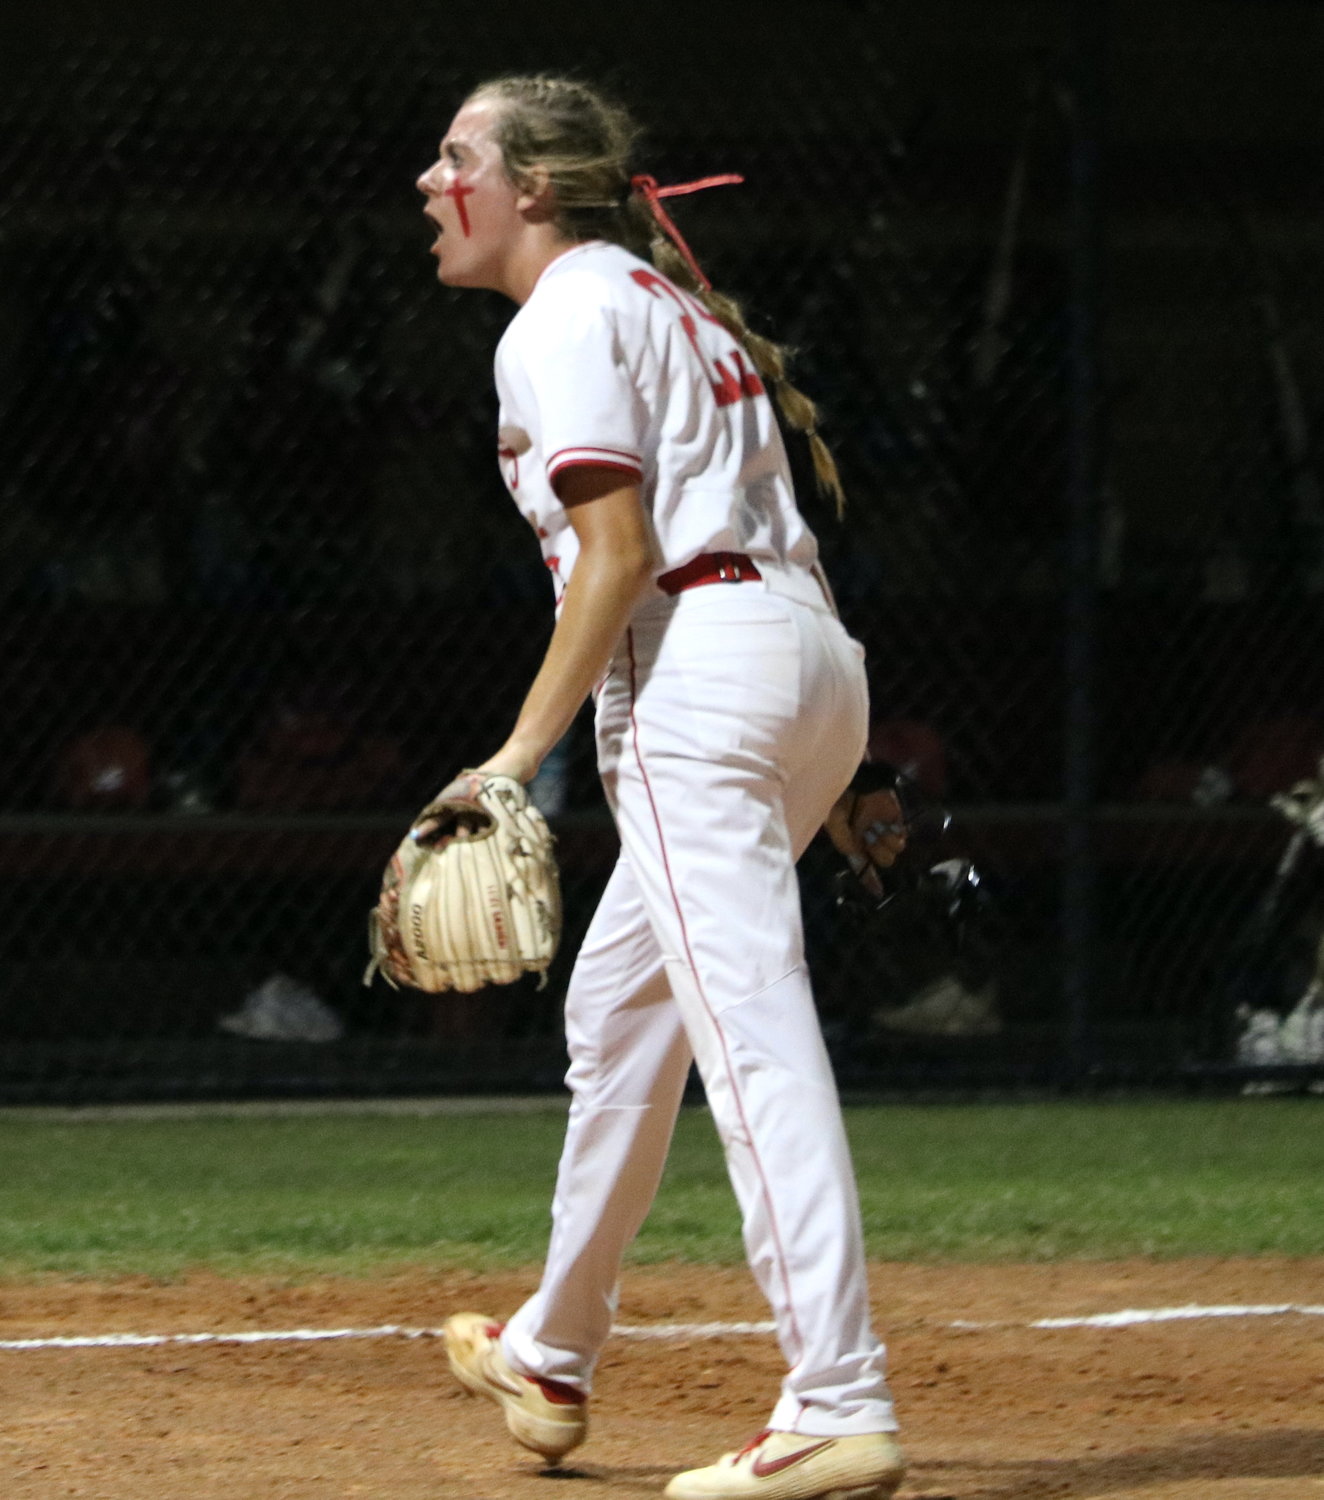 Cameryn Harrison reacts after striking out a hitter during Wednesday’s Class 6A Regional Semifinal game between Katy and Pearland at the Katy softball field.